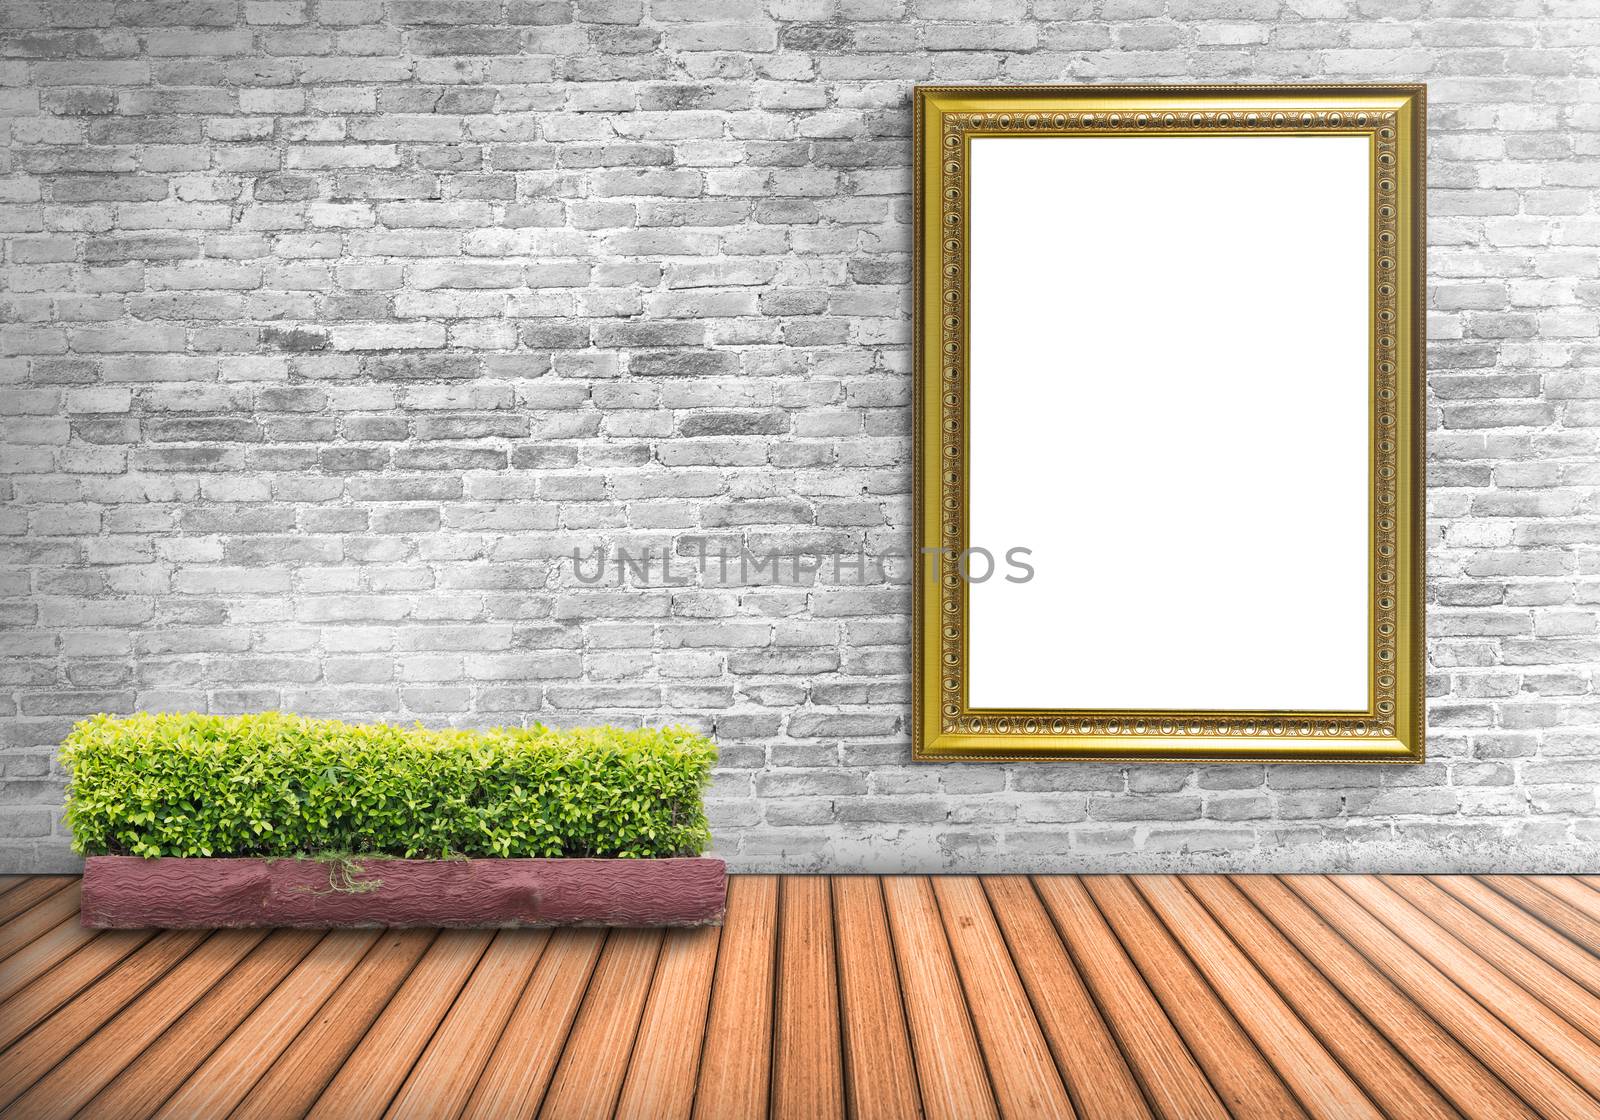 Blank frame vintage on a concrete wall with tree pot on wood flo by jayzynism